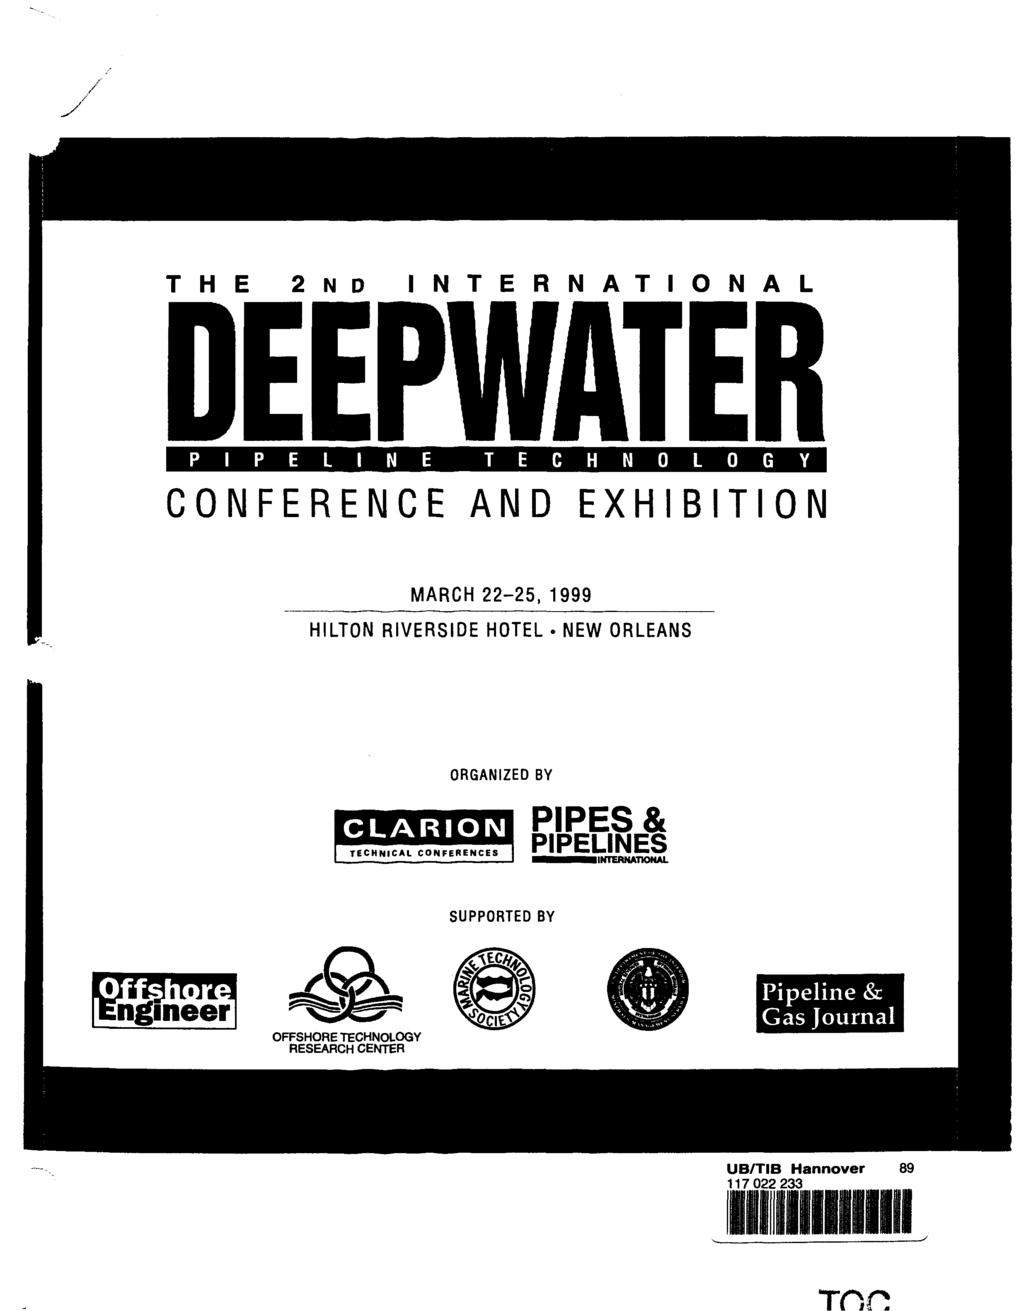 T H E 2 N D I N T E R N A T I O N A L DEEPWATER CONFERENCE AND EXHIBITIO MARCH 22-25, 1999 HILTON RIVERSIDE HOTEL NEW ORLEANS ORGANIZED BY CLARION